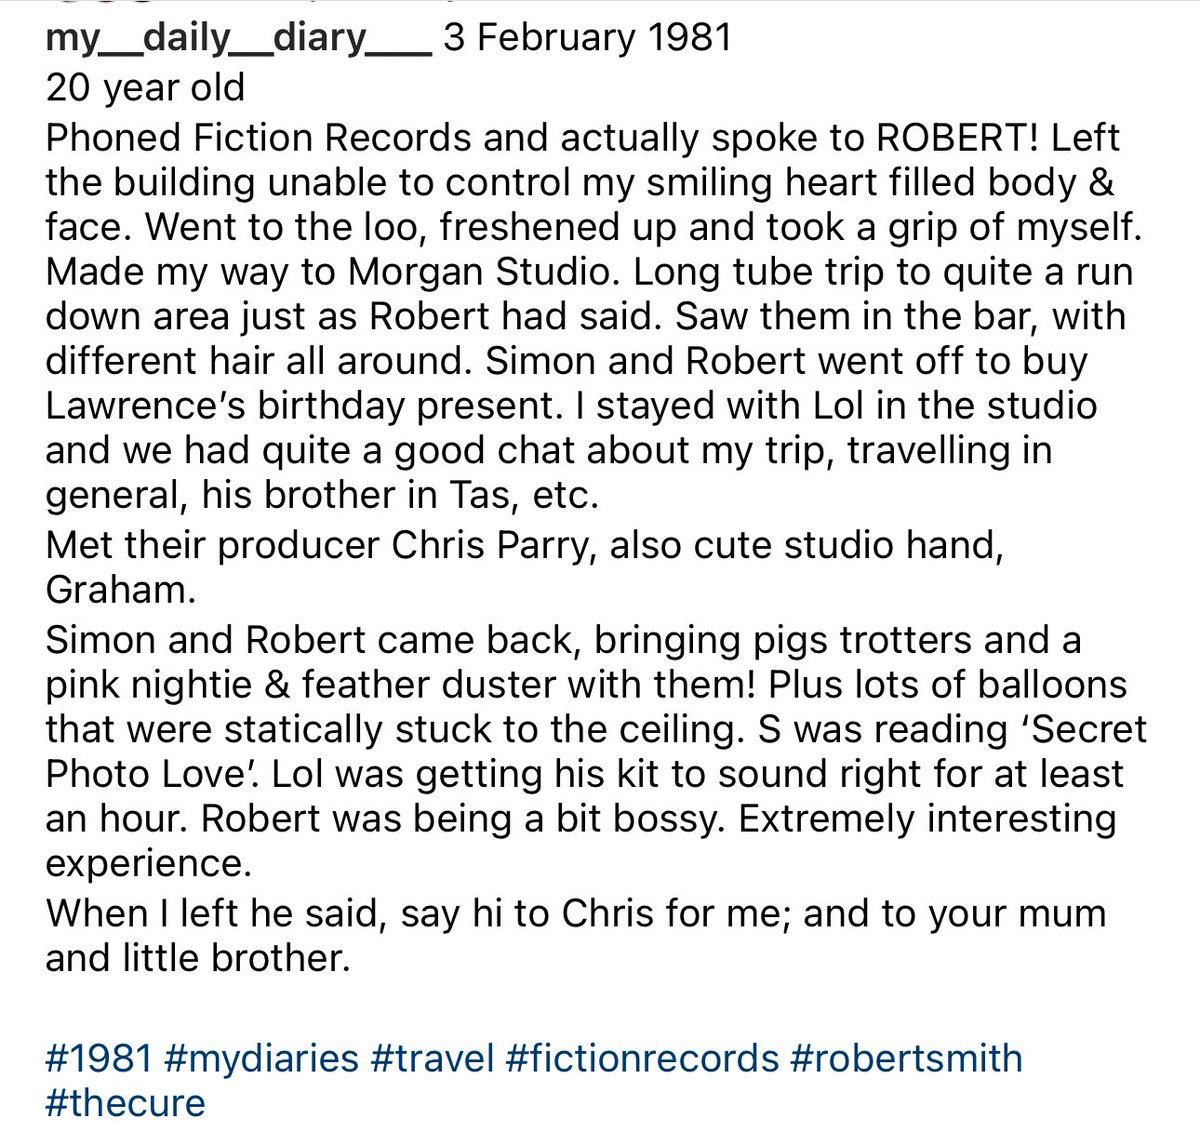 Absolutely adorable and lovely fan story shared by Hariklia Heristanidis Via IG on her fantastic my daily diary page. Sounds like happy times on a happy birthday for @LolTolhurst #thecure #faith #youth #othervoices #otherworlds